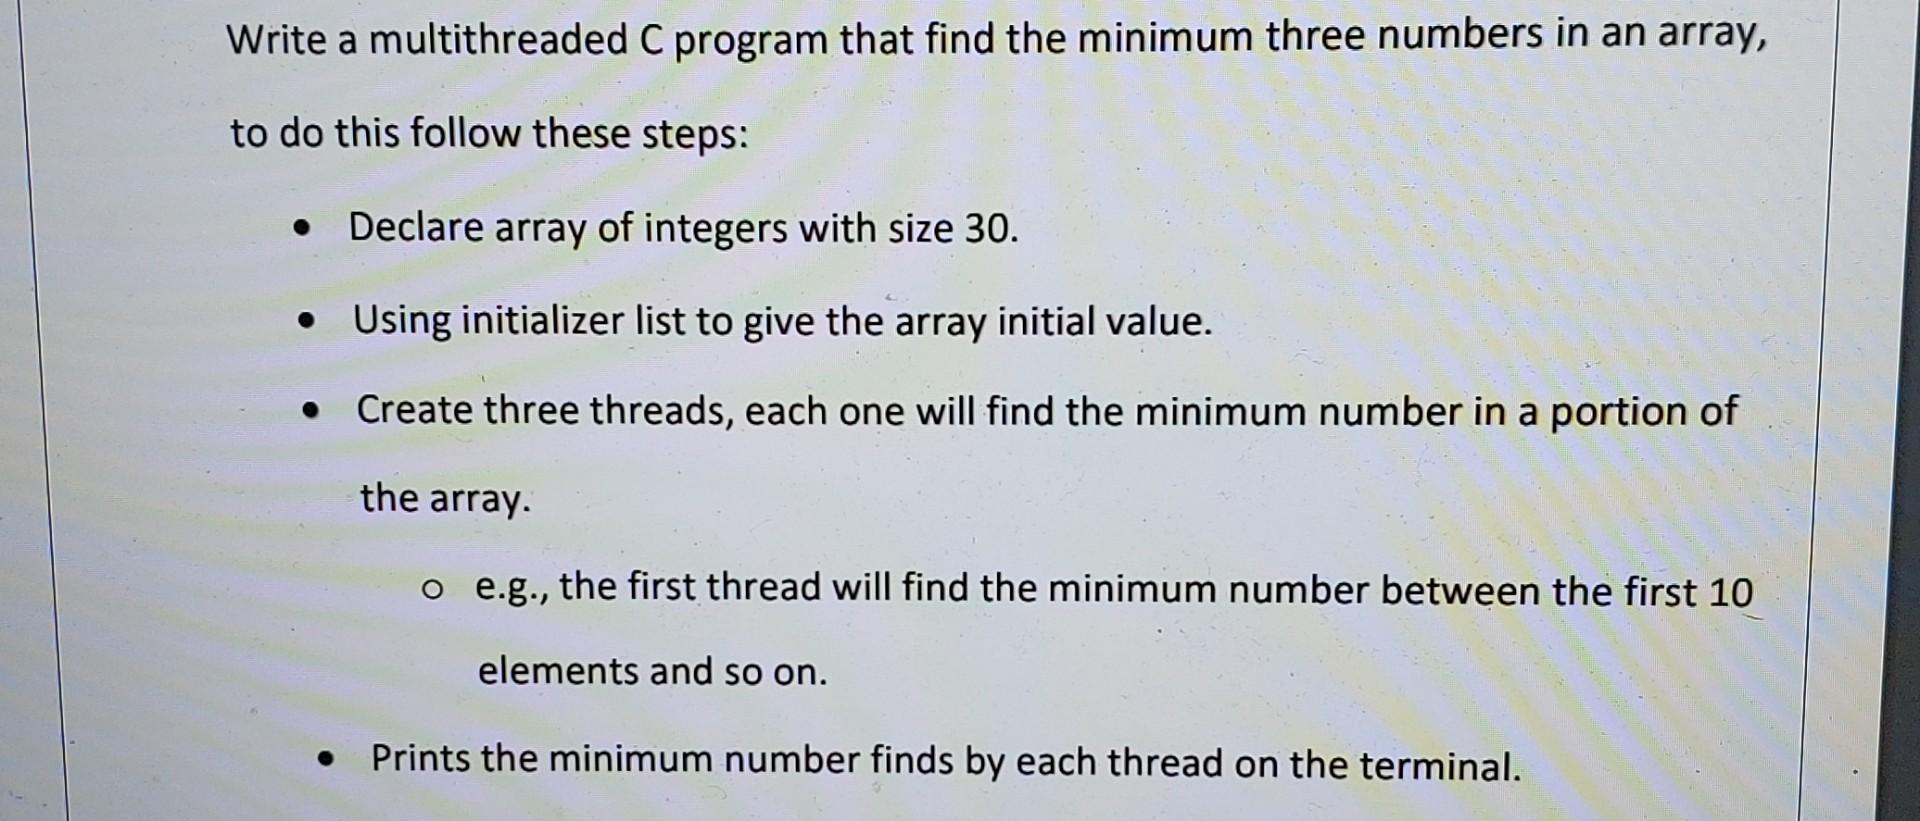 Write a multithreaded C program that find the minimum three numbers in an array, to do this follow these